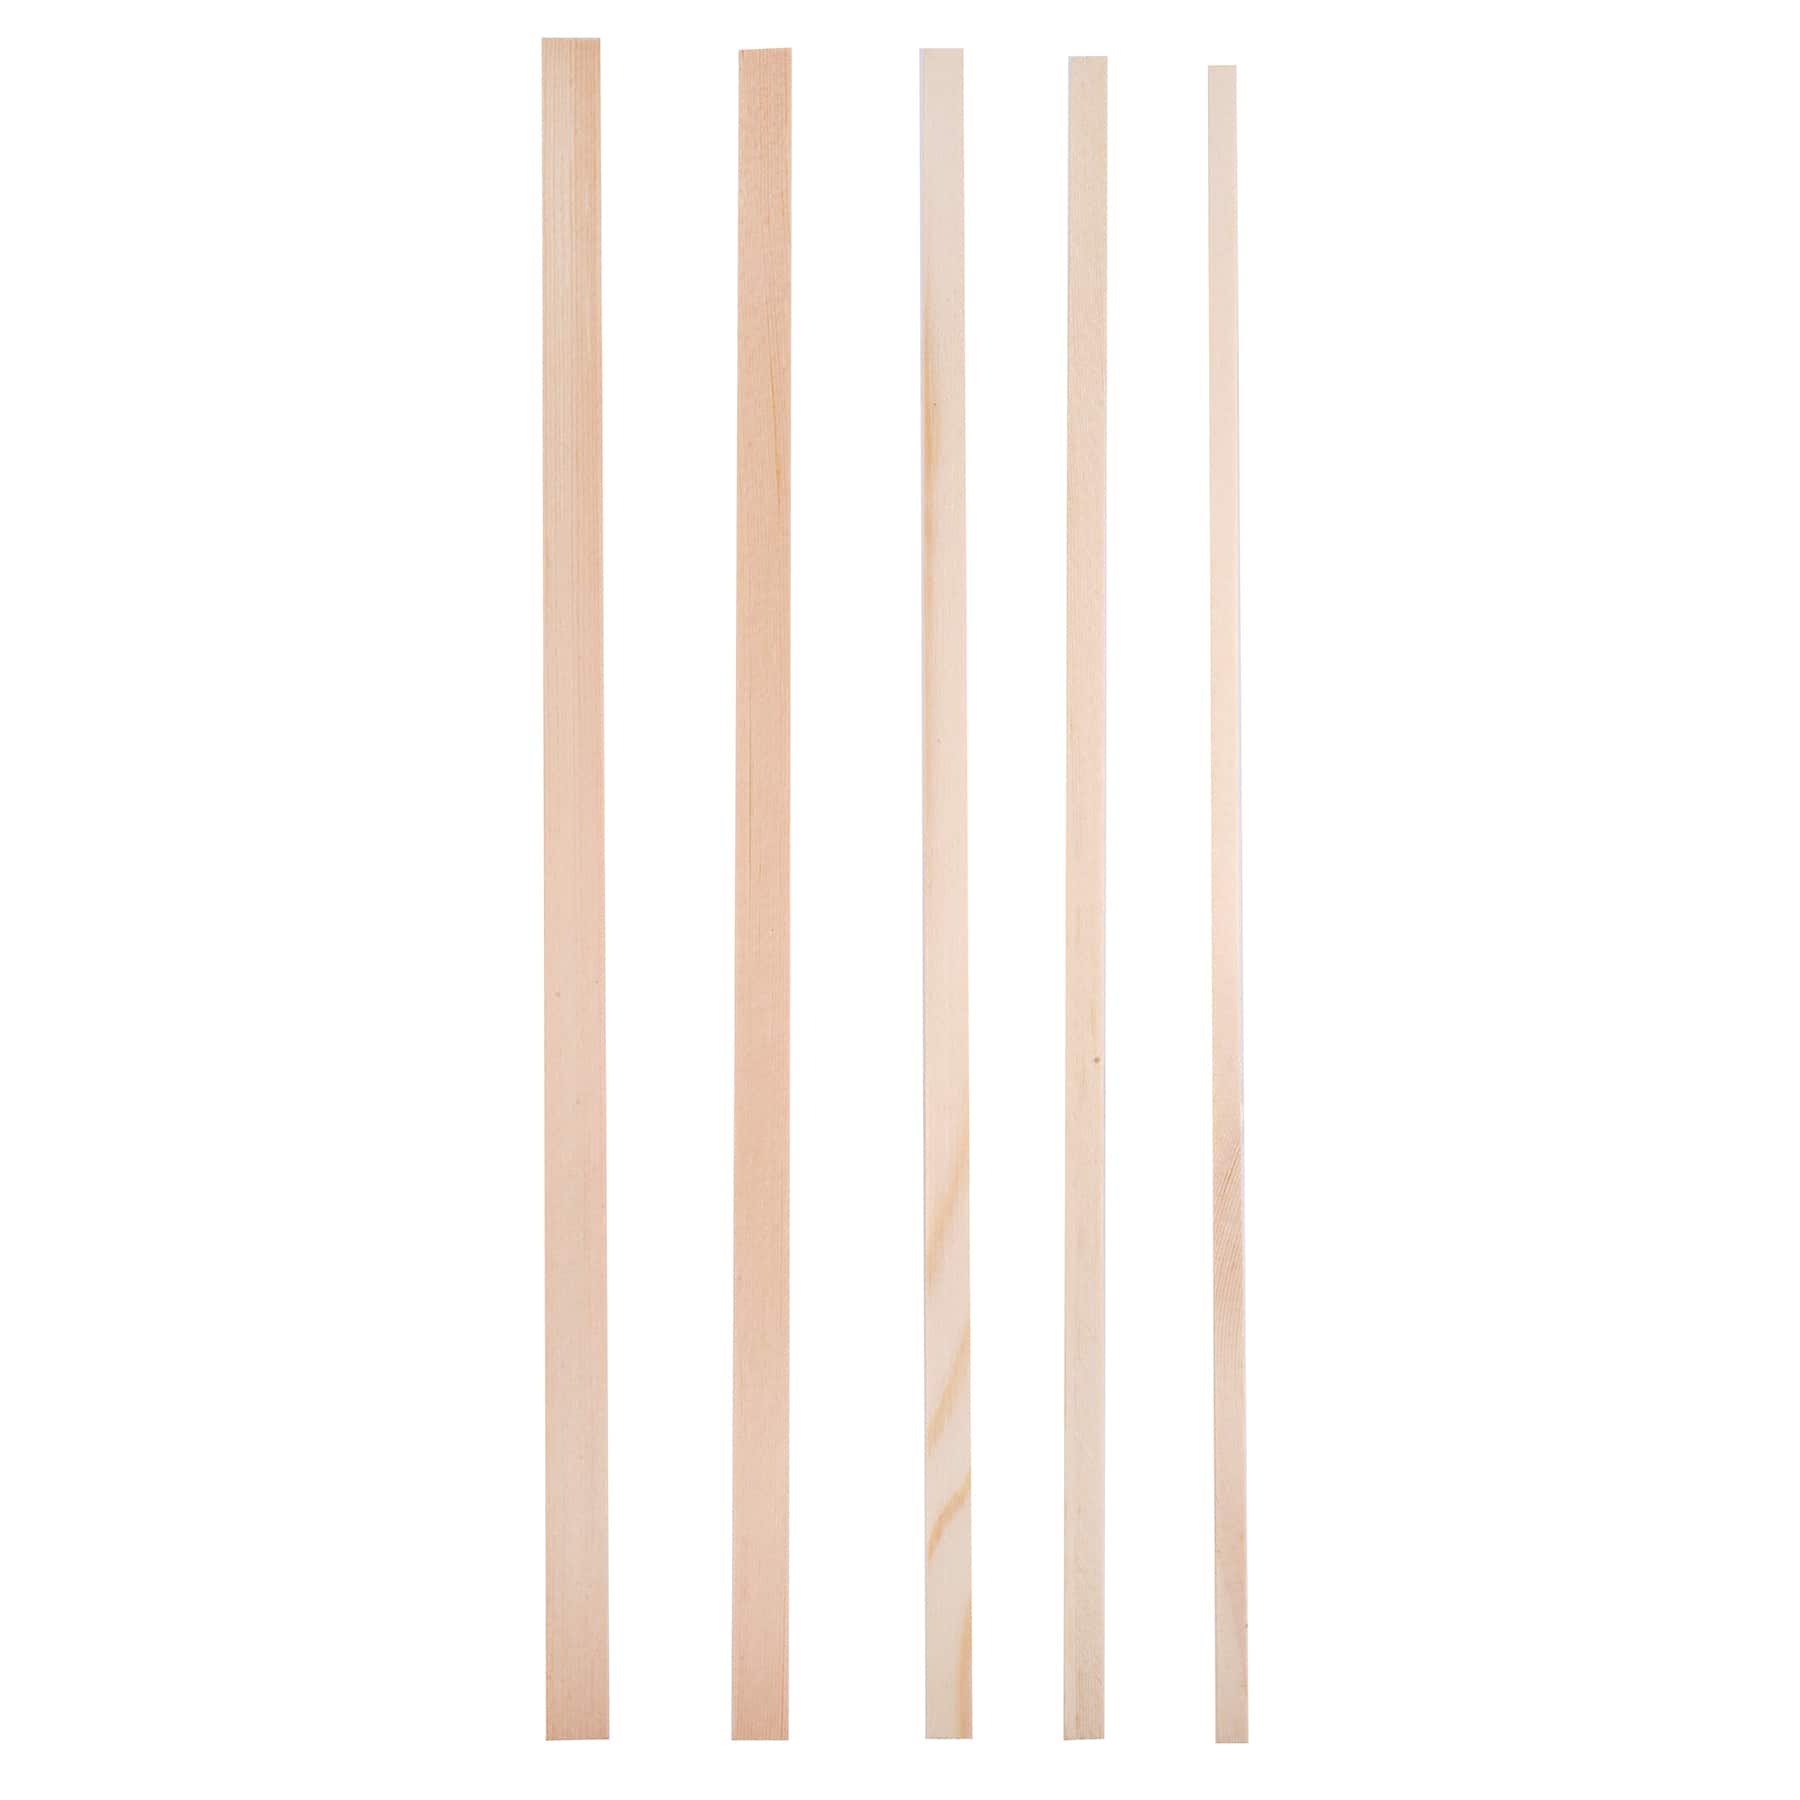 12 Packs: 8 ct. (96 total) 12 Wooden Square Dowels by Creatology™